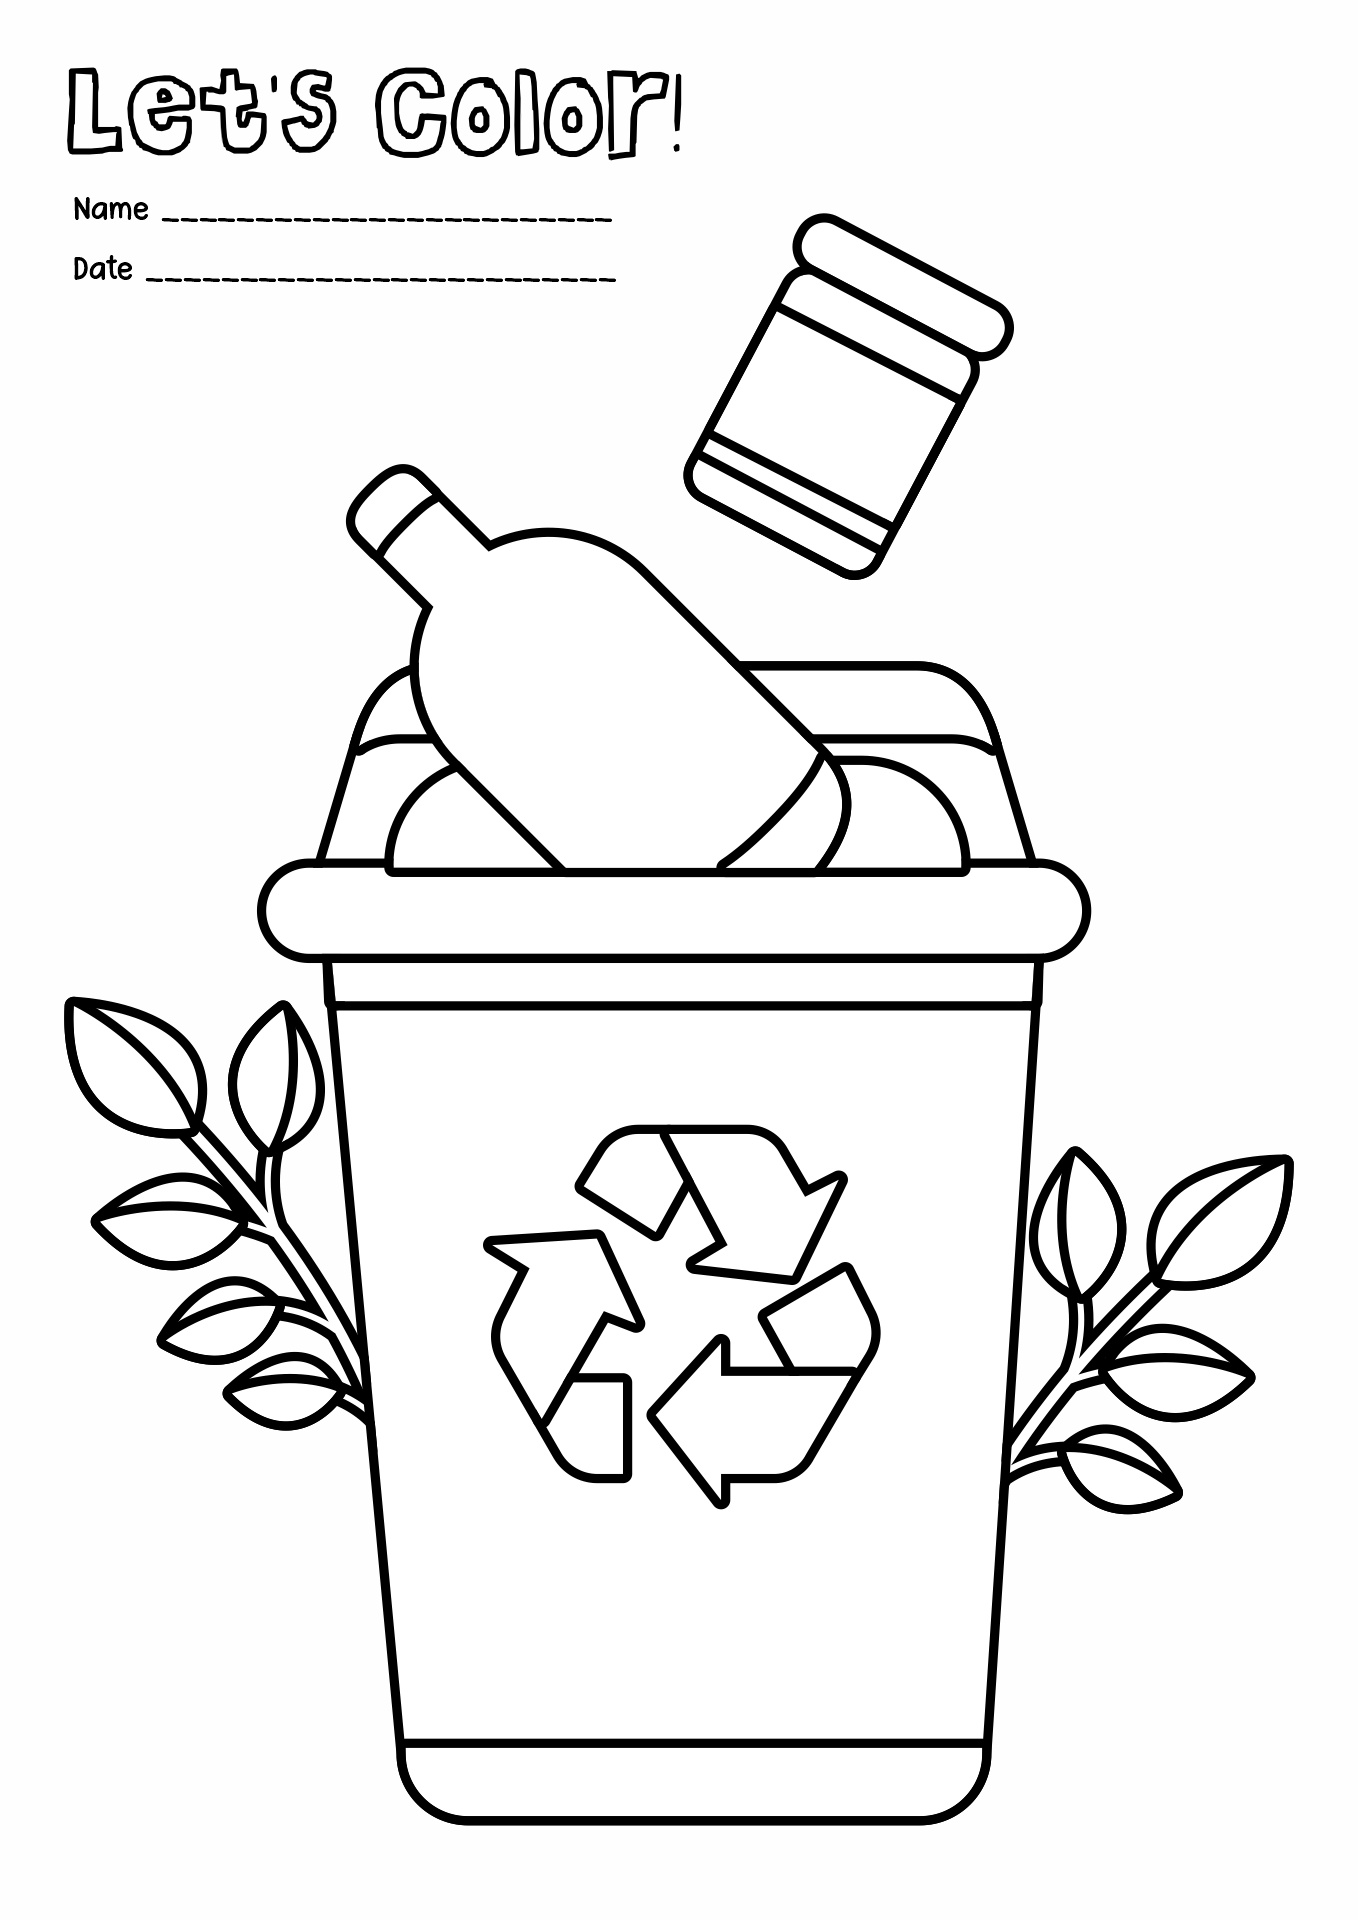 Recycling Fun Coloring Pages Image